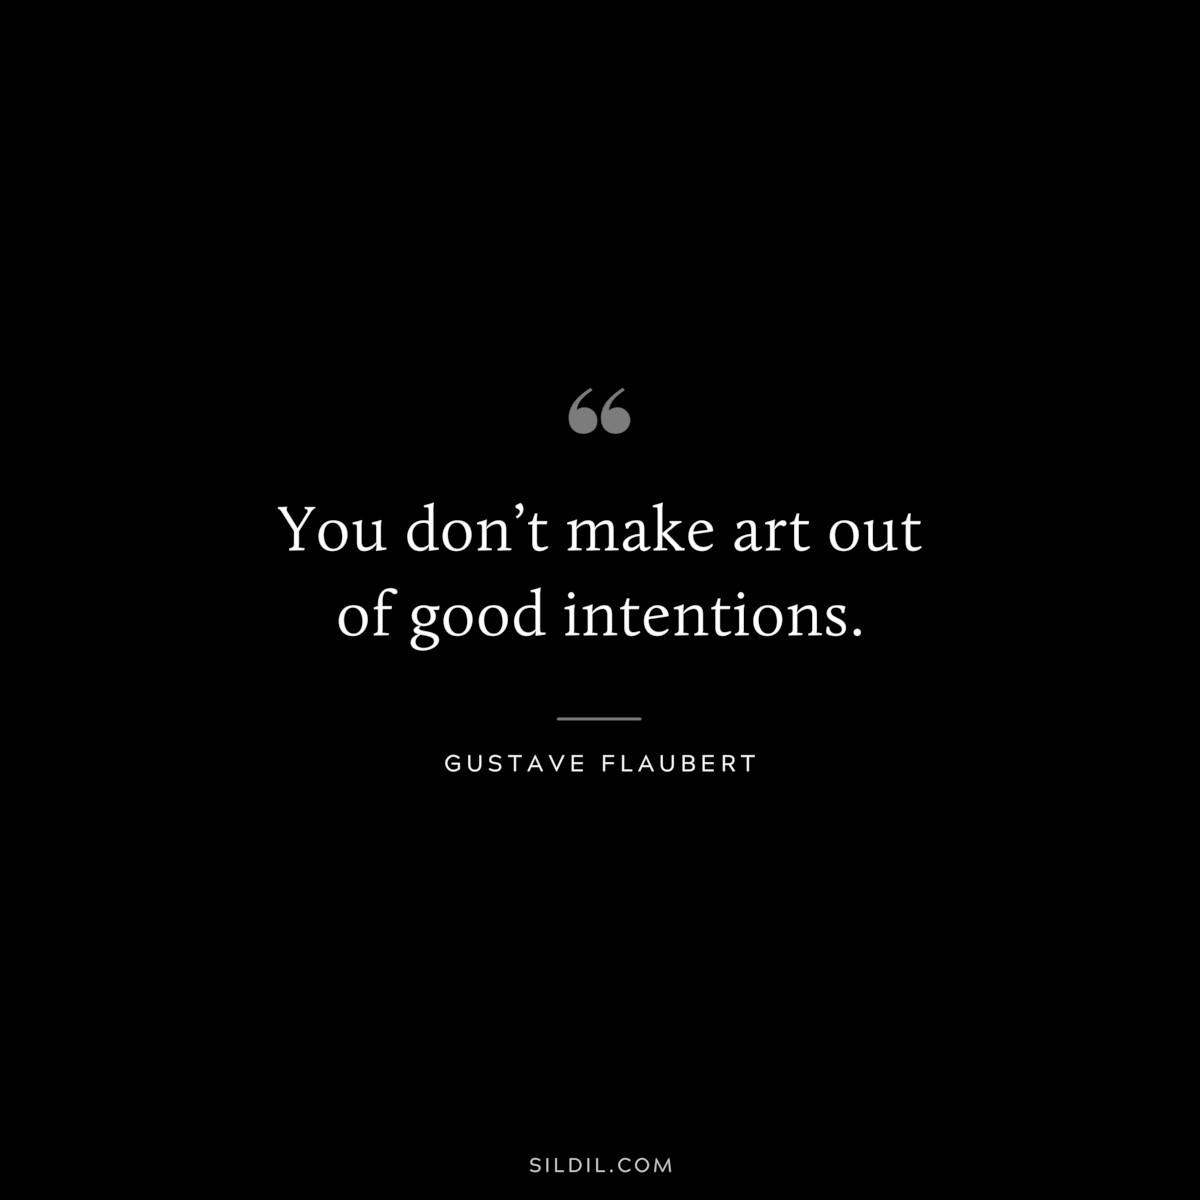 You don’t make art out of good intentions. ― Gustave Flaubert